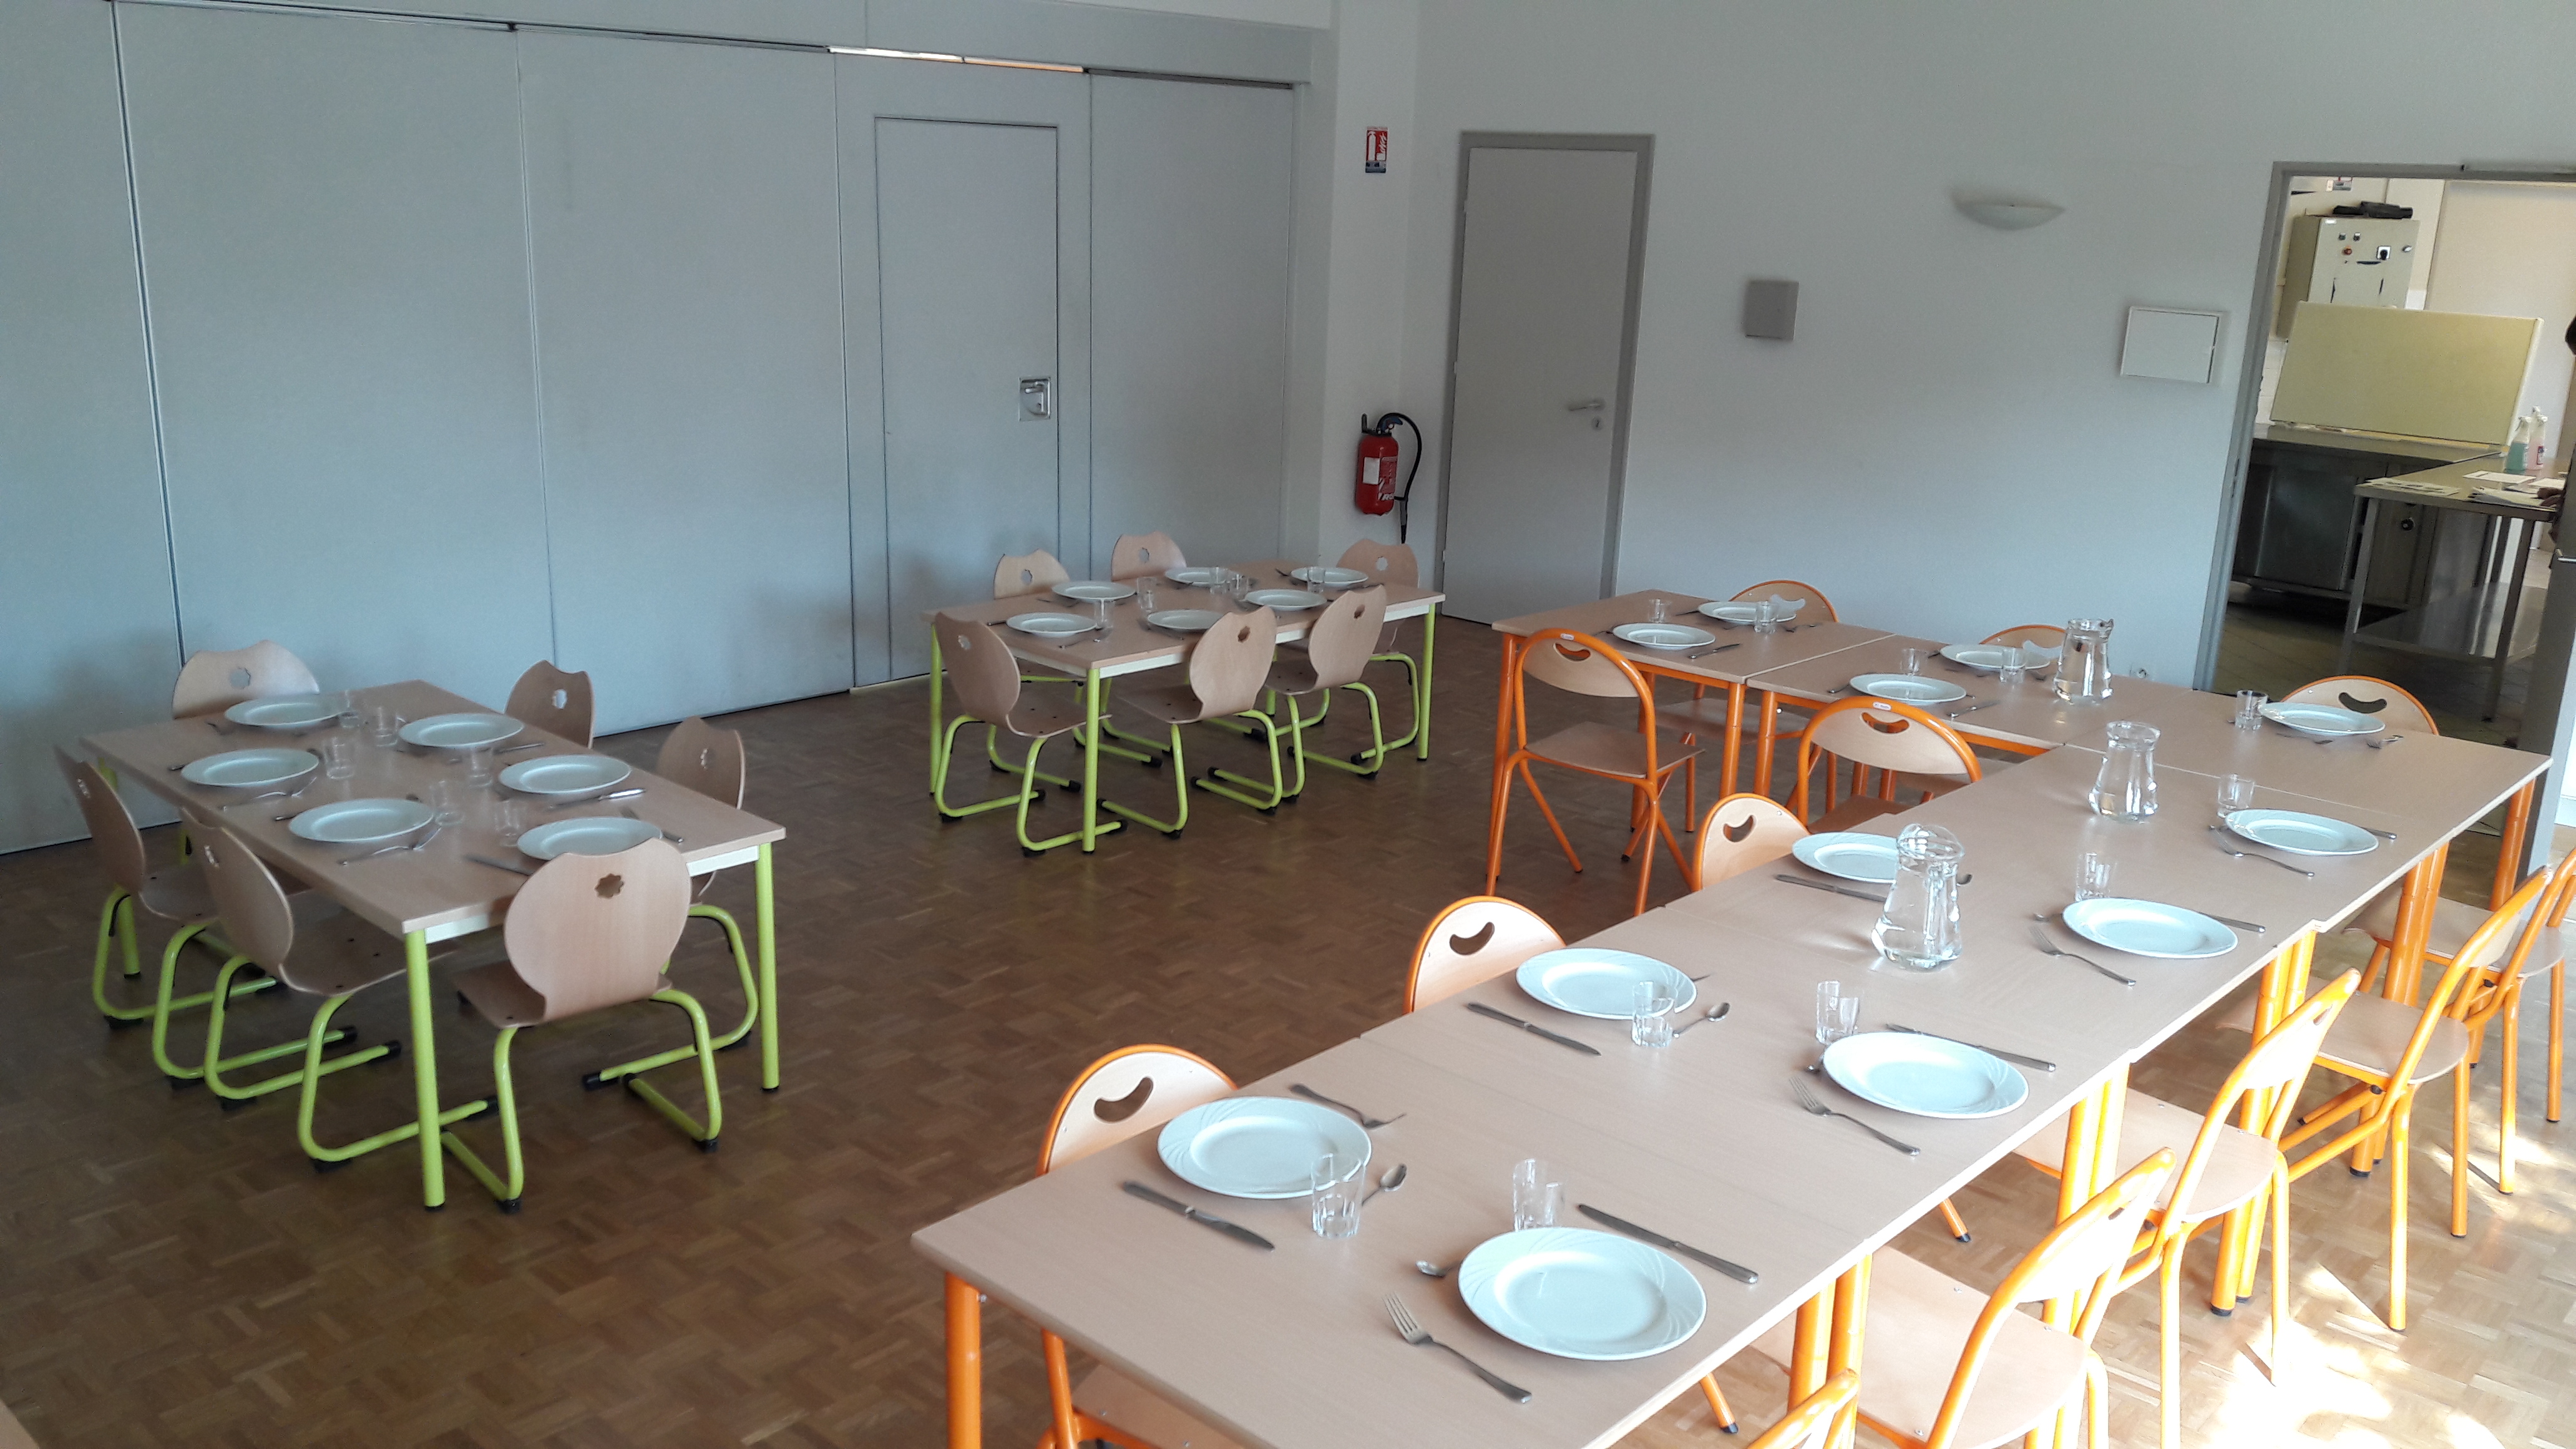 cantine scolaire.jpg